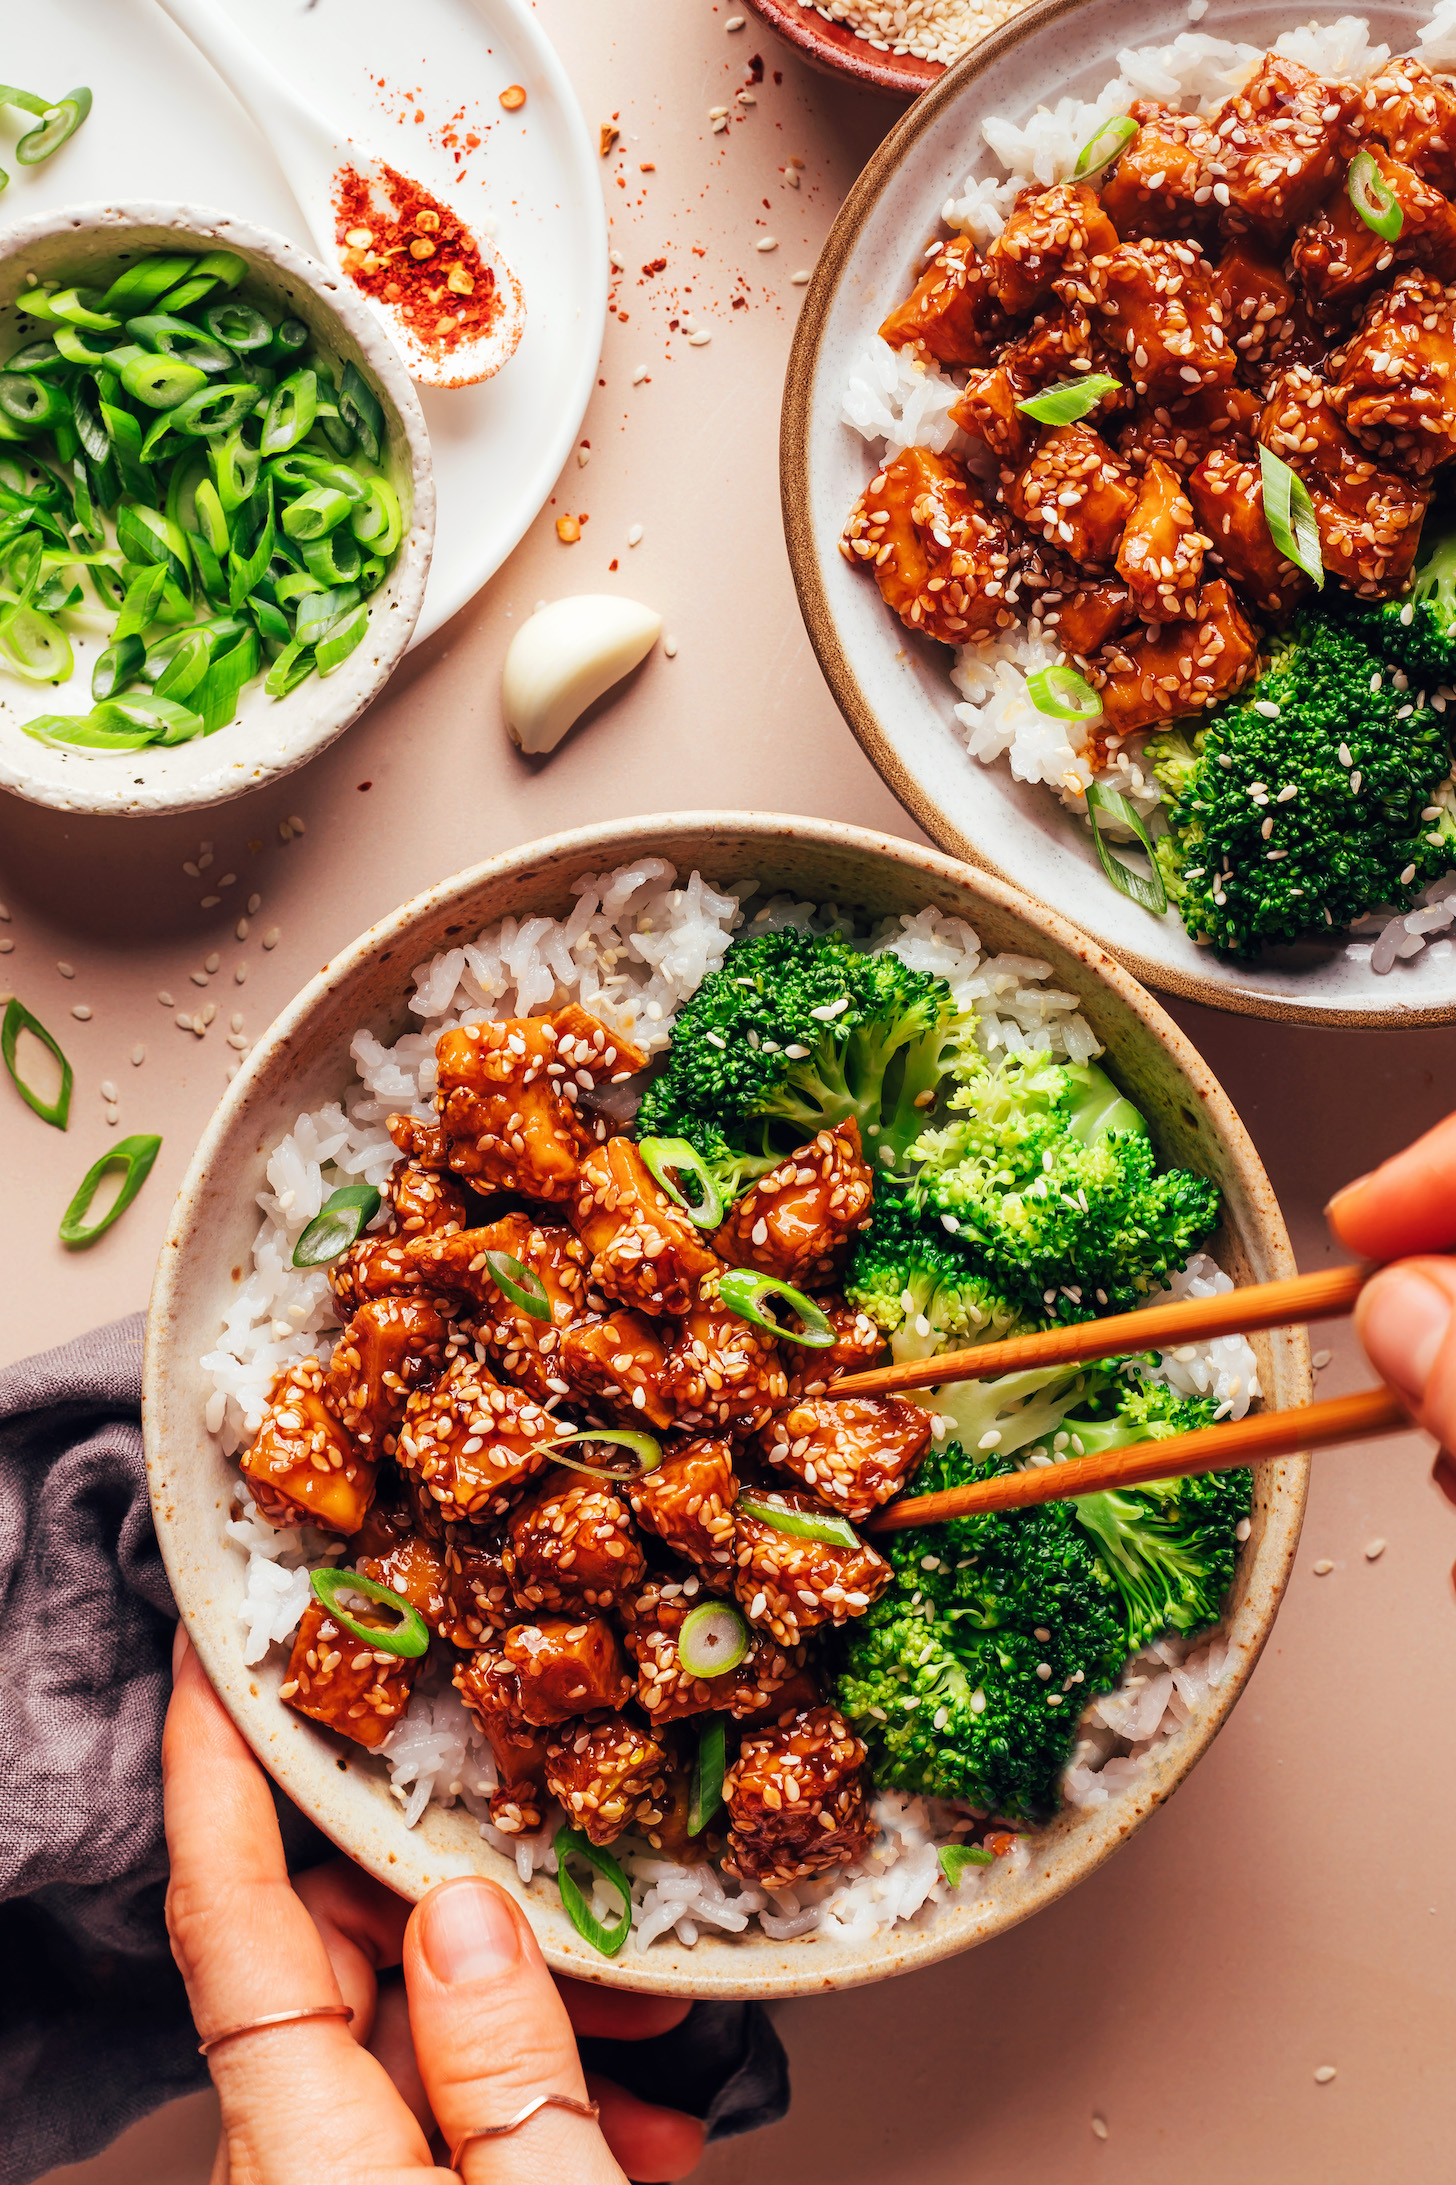 Using chopsticks to pick up a bite of sesame tofu from a bowl of steamed rice and broccoli